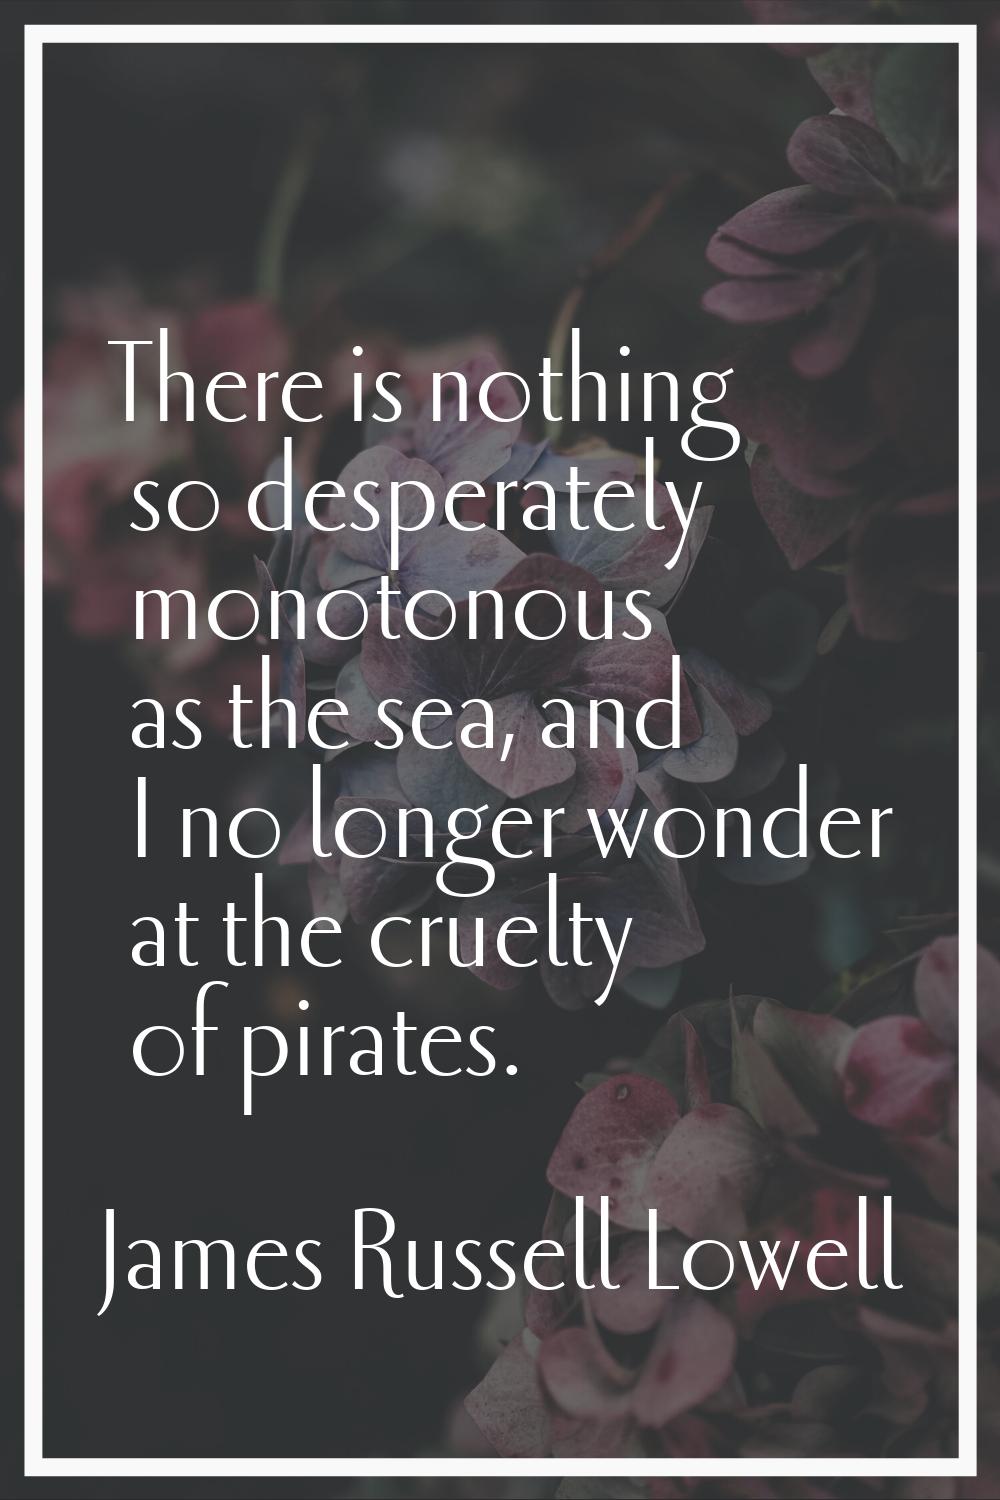 There is nothing so desperately monotonous as the sea, and I no longer wonder at the cruelty of pir